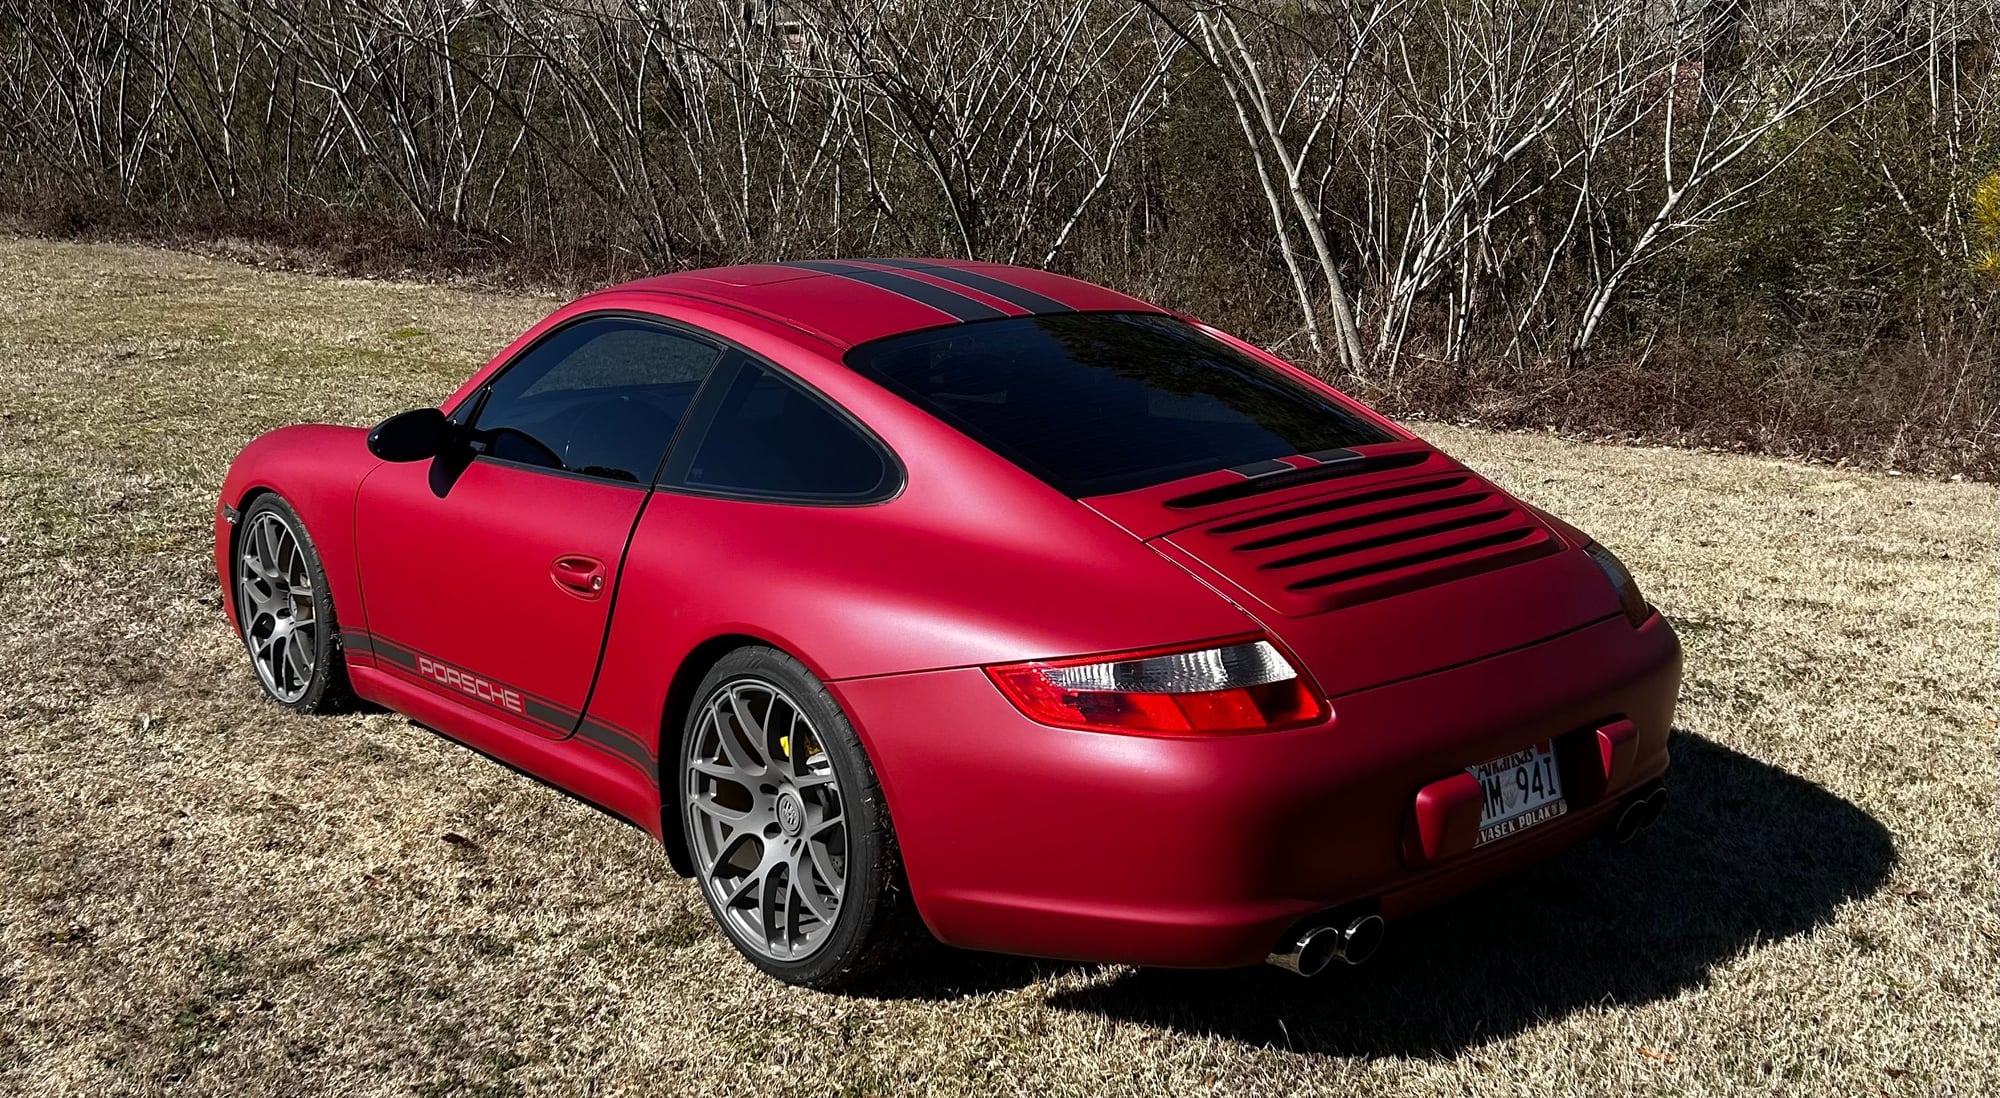 2005 Porsche 911 - 2005 Porsche 997 Coupe - Used - VIN WPA00AA29945S7153 - 72,000 Miles - 6 cyl - 2WD - Automatic - Coupe - Other - Hot Springs, AR 71901, United States